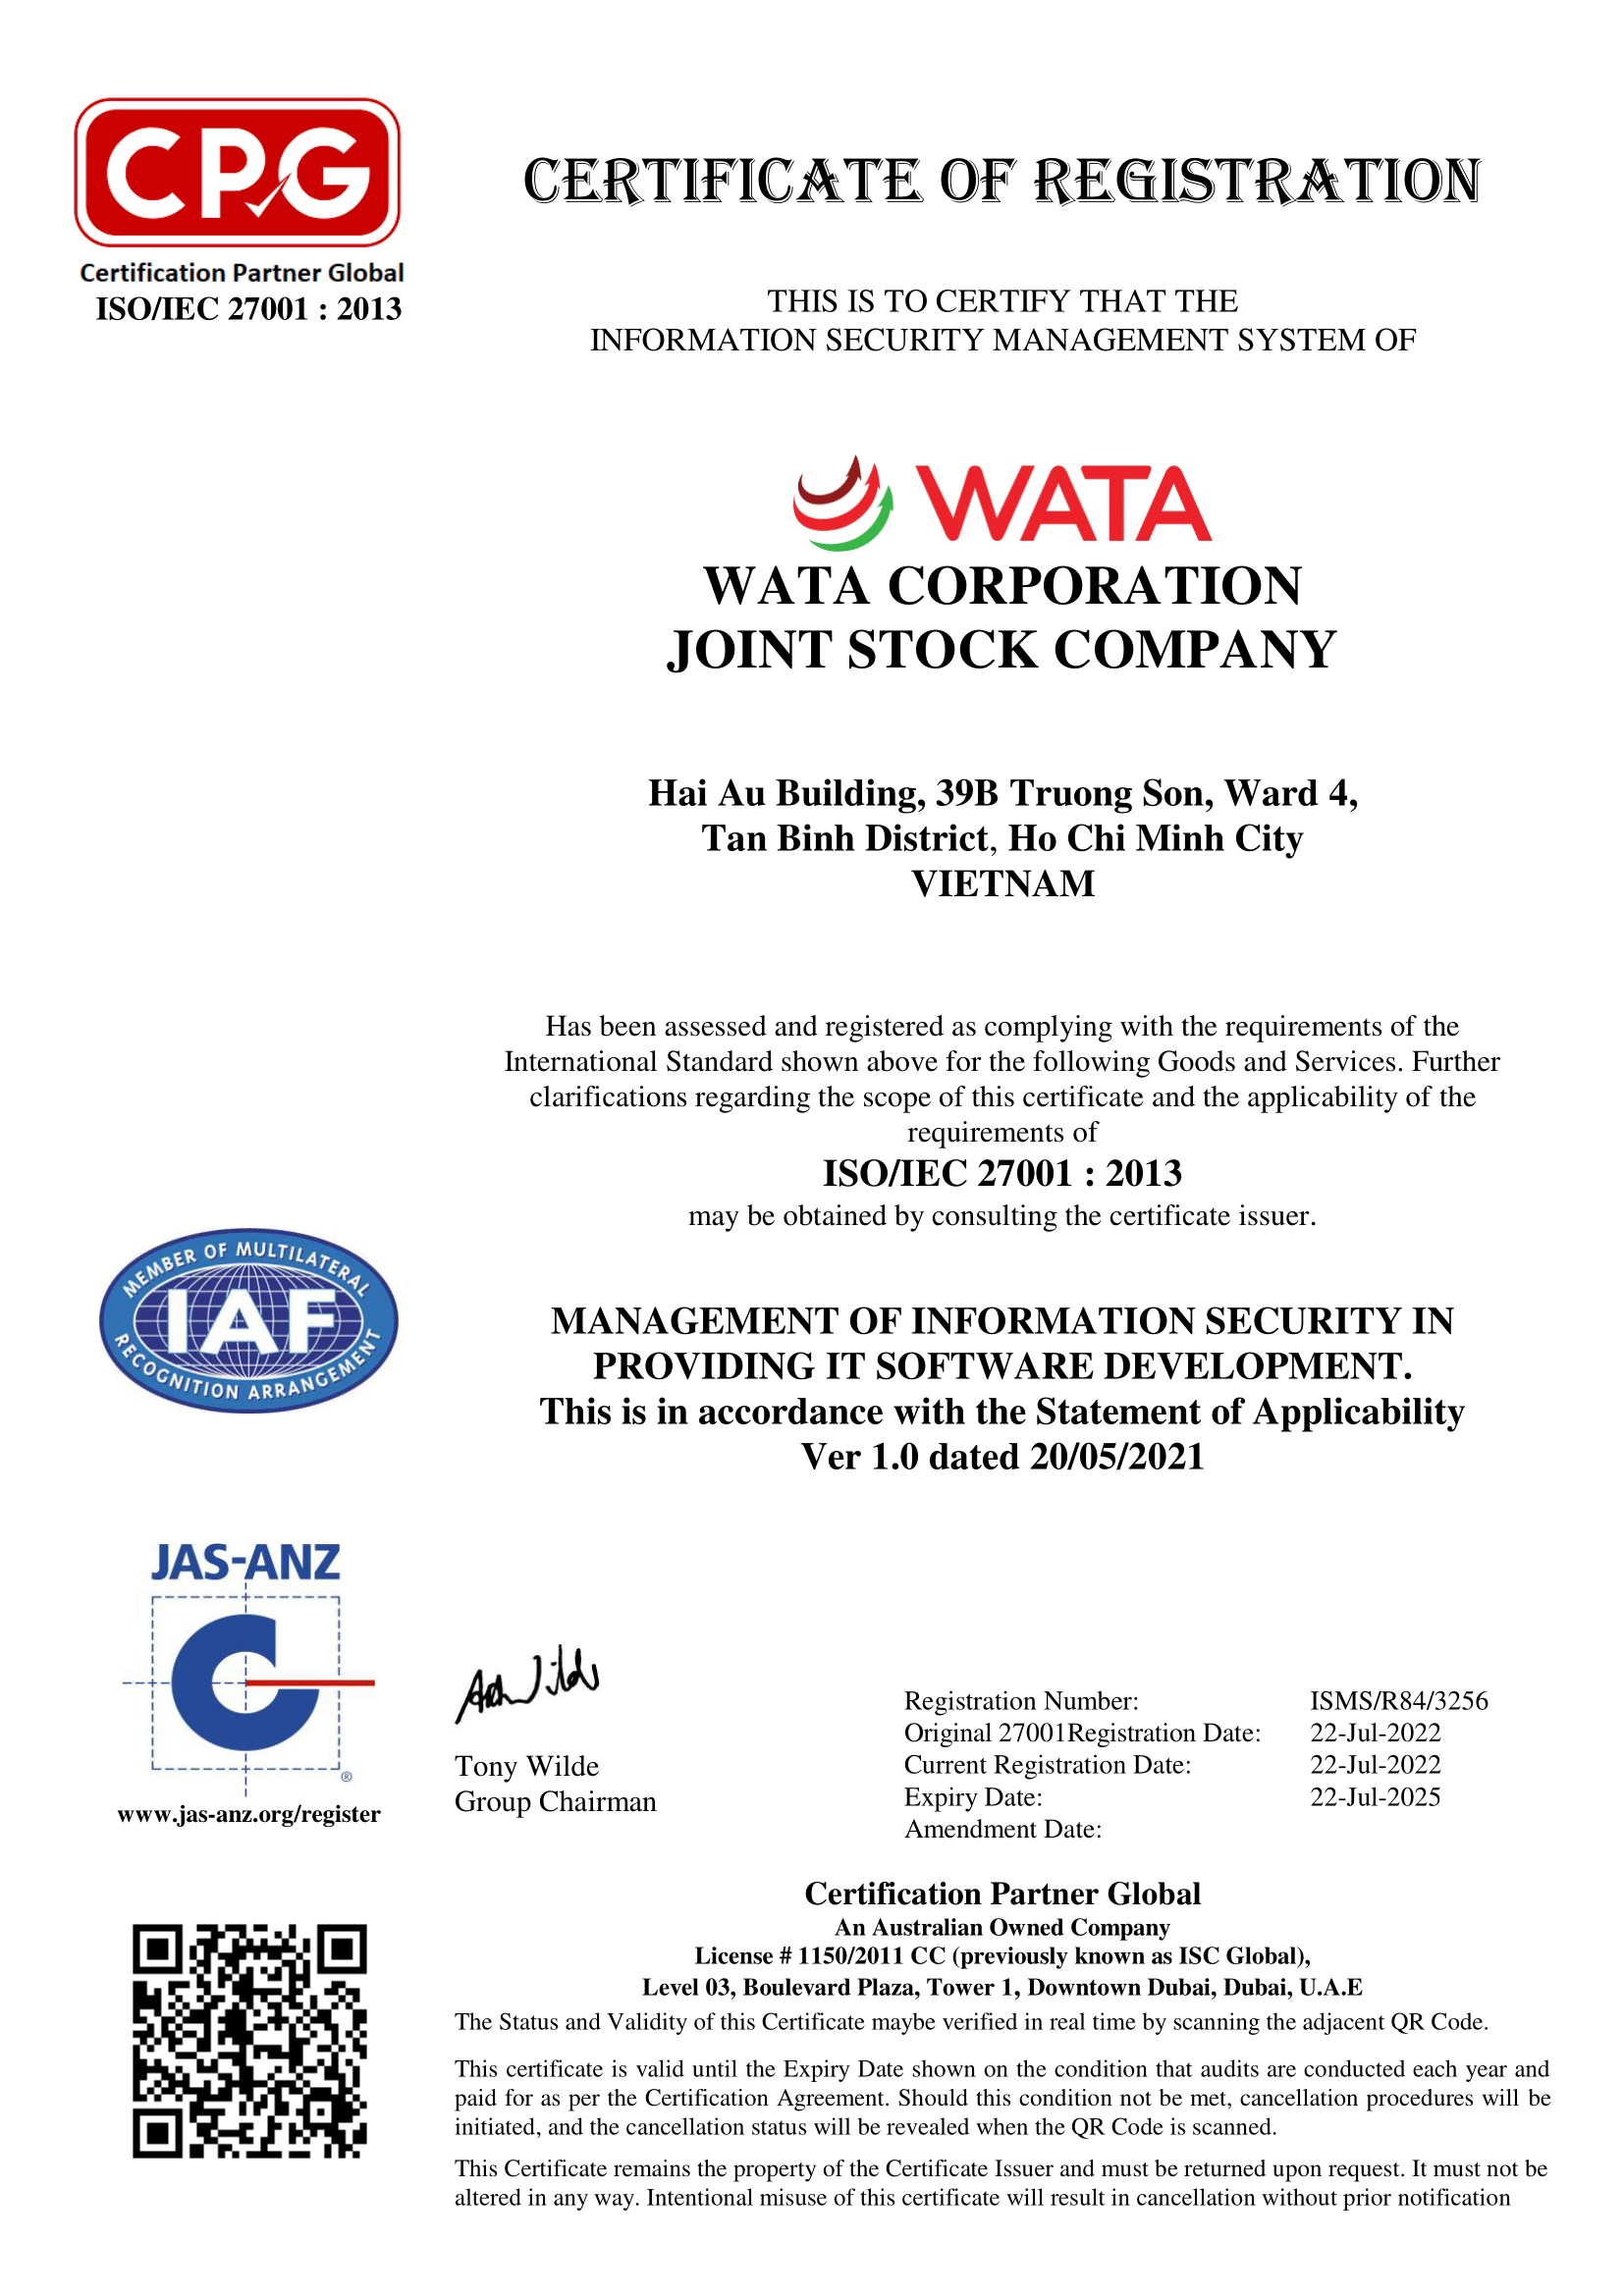 WATA successfully achieved ISO/IEC 27001:2013 certification